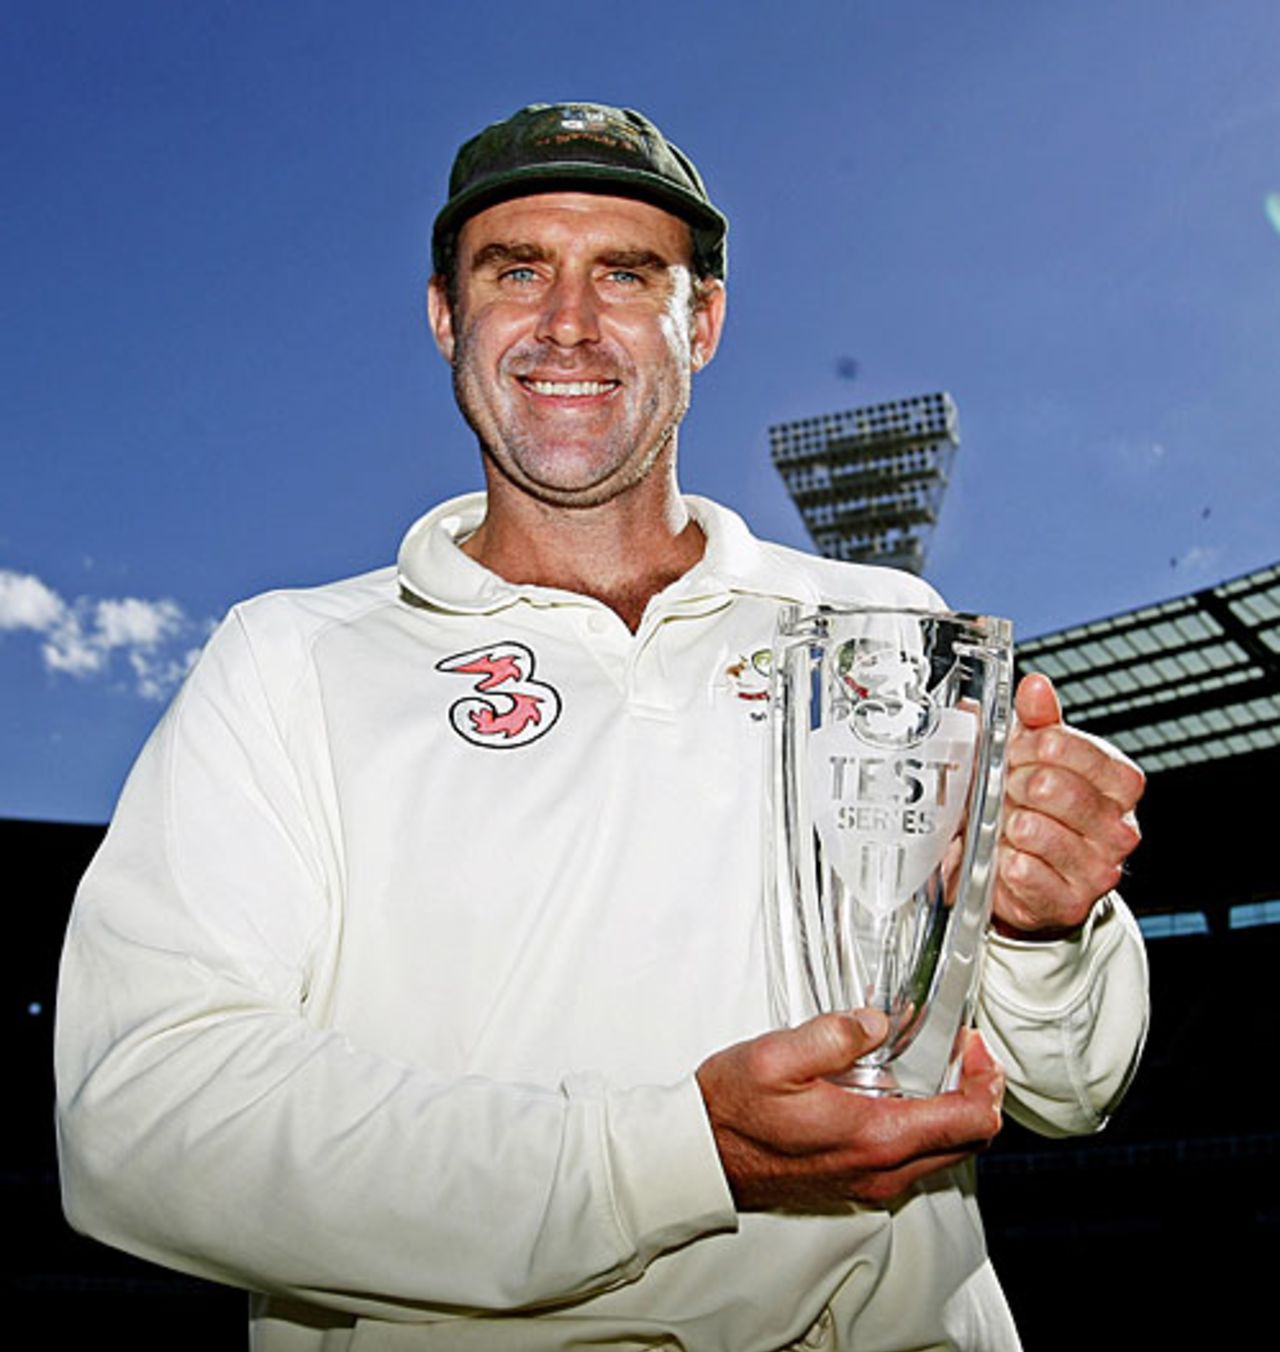 Matthew Hayden was the Man of the Match for his 124 and 47, Australia v India, 1st Test, Melbourne, 4th day, December 29, 2007